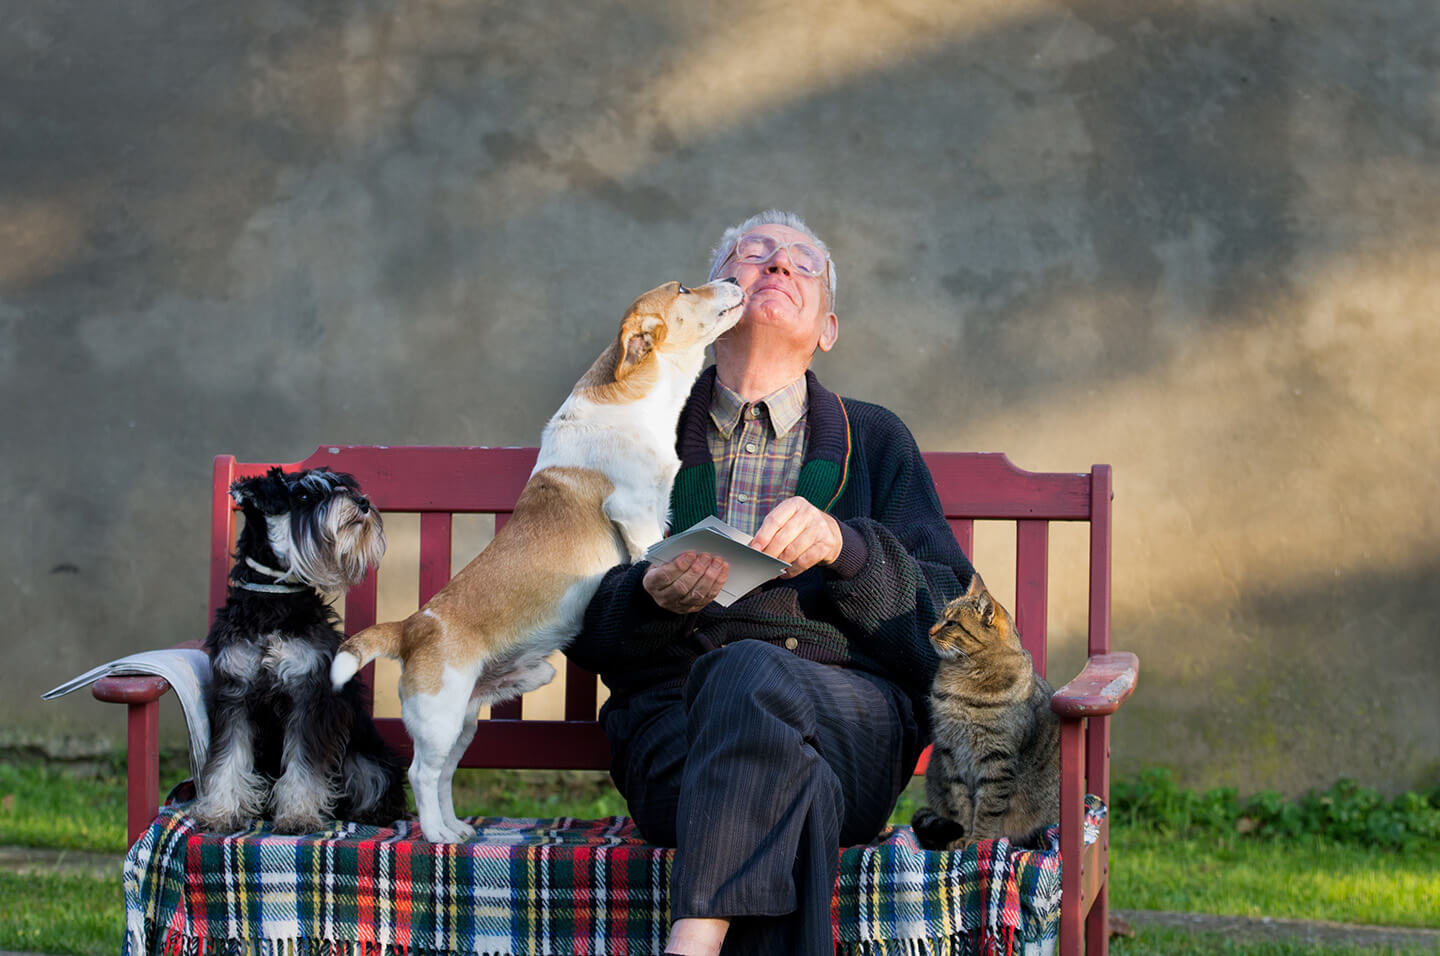 Man sitting on park bench with 2 small dogs and a cat. Credit: Jevtic